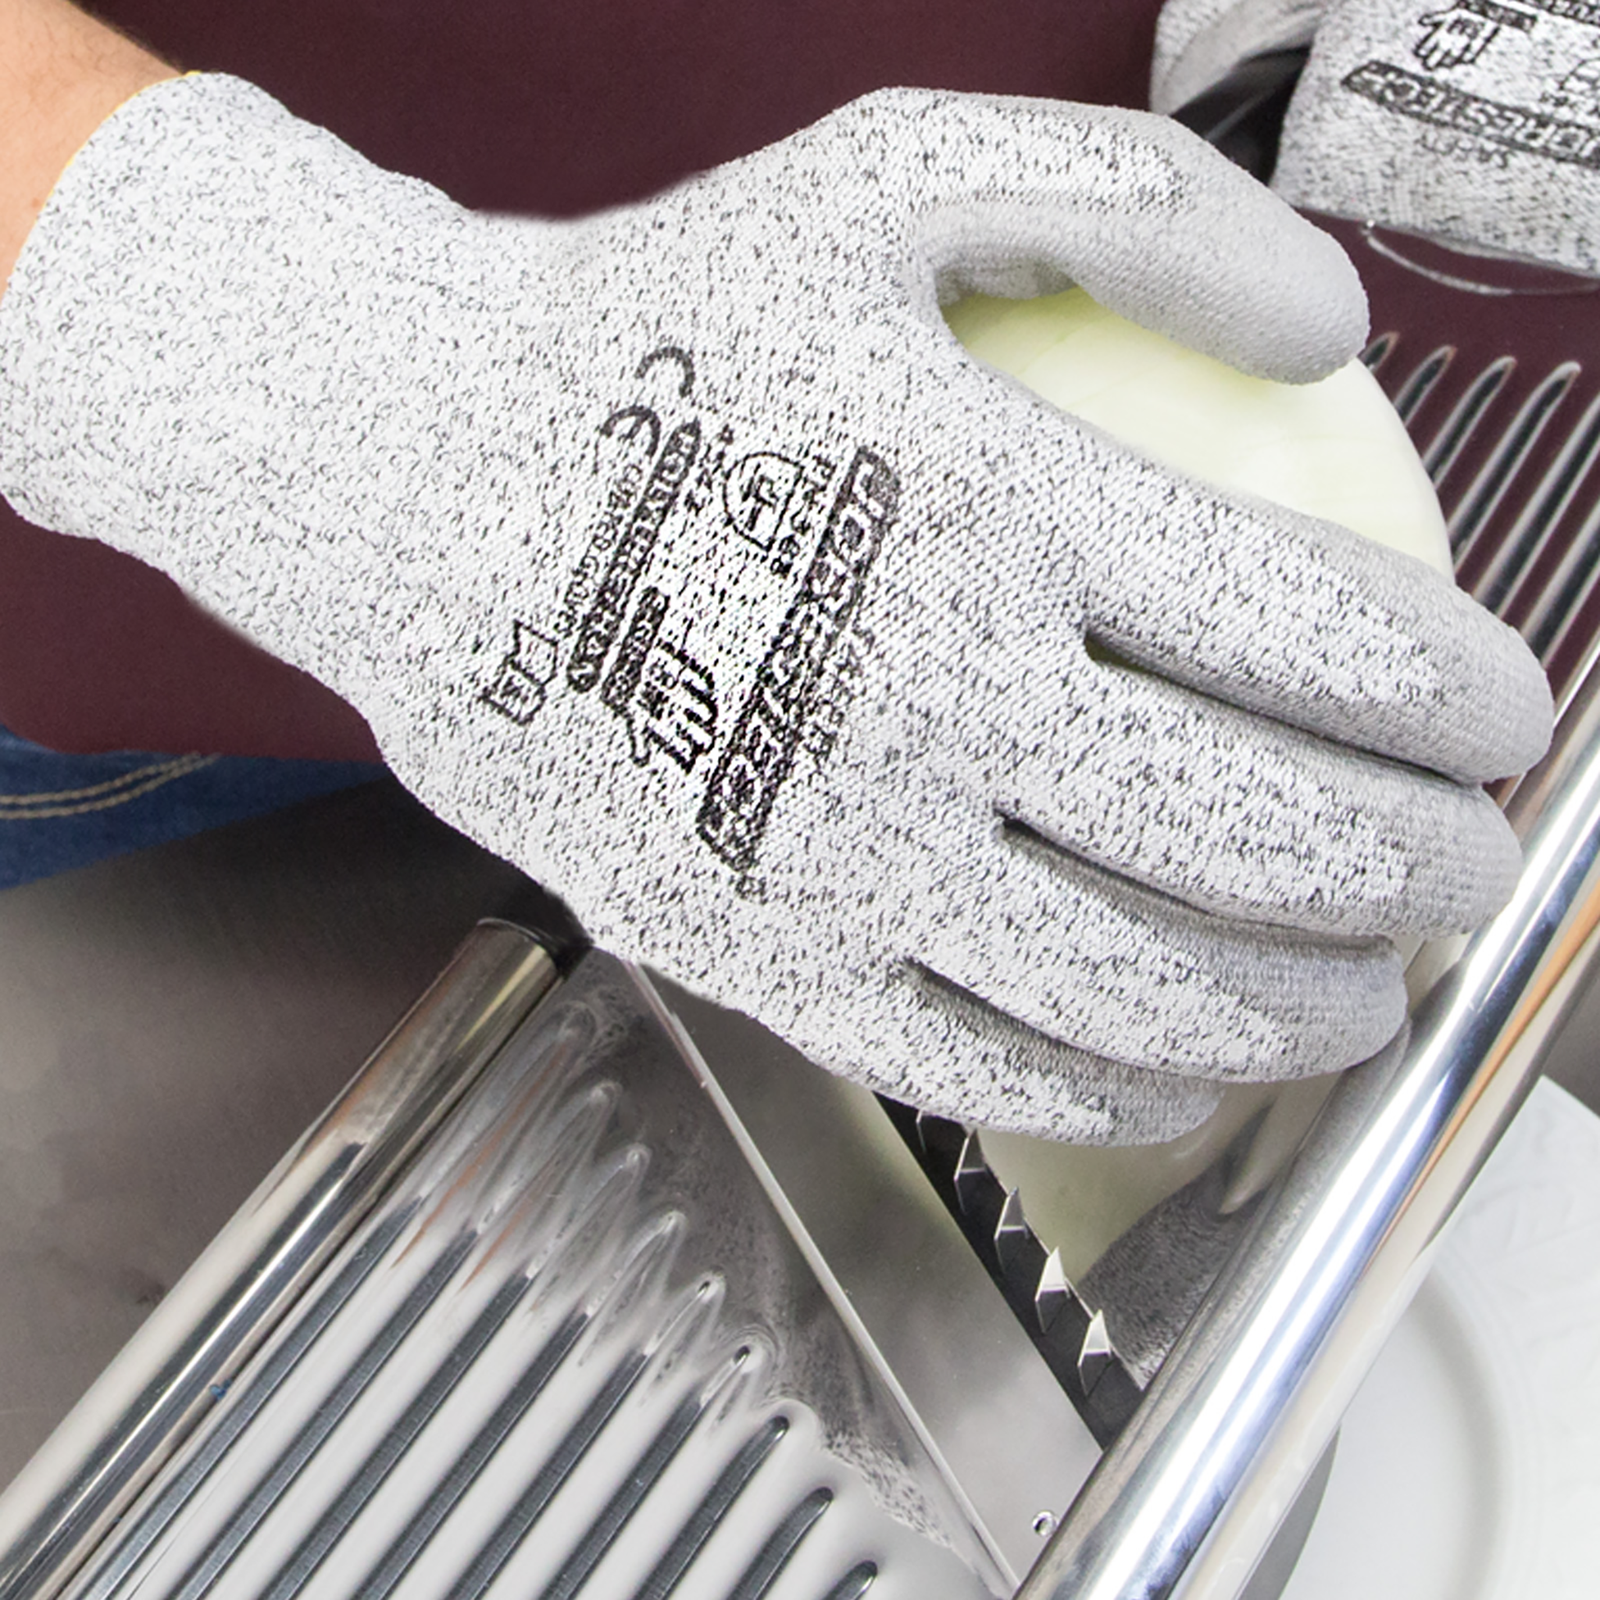 Person wearing the cut resistant JORESTECH gray safety work gloves with polyurethane dipped palm while cutting an onion with a silver metal blades slicer